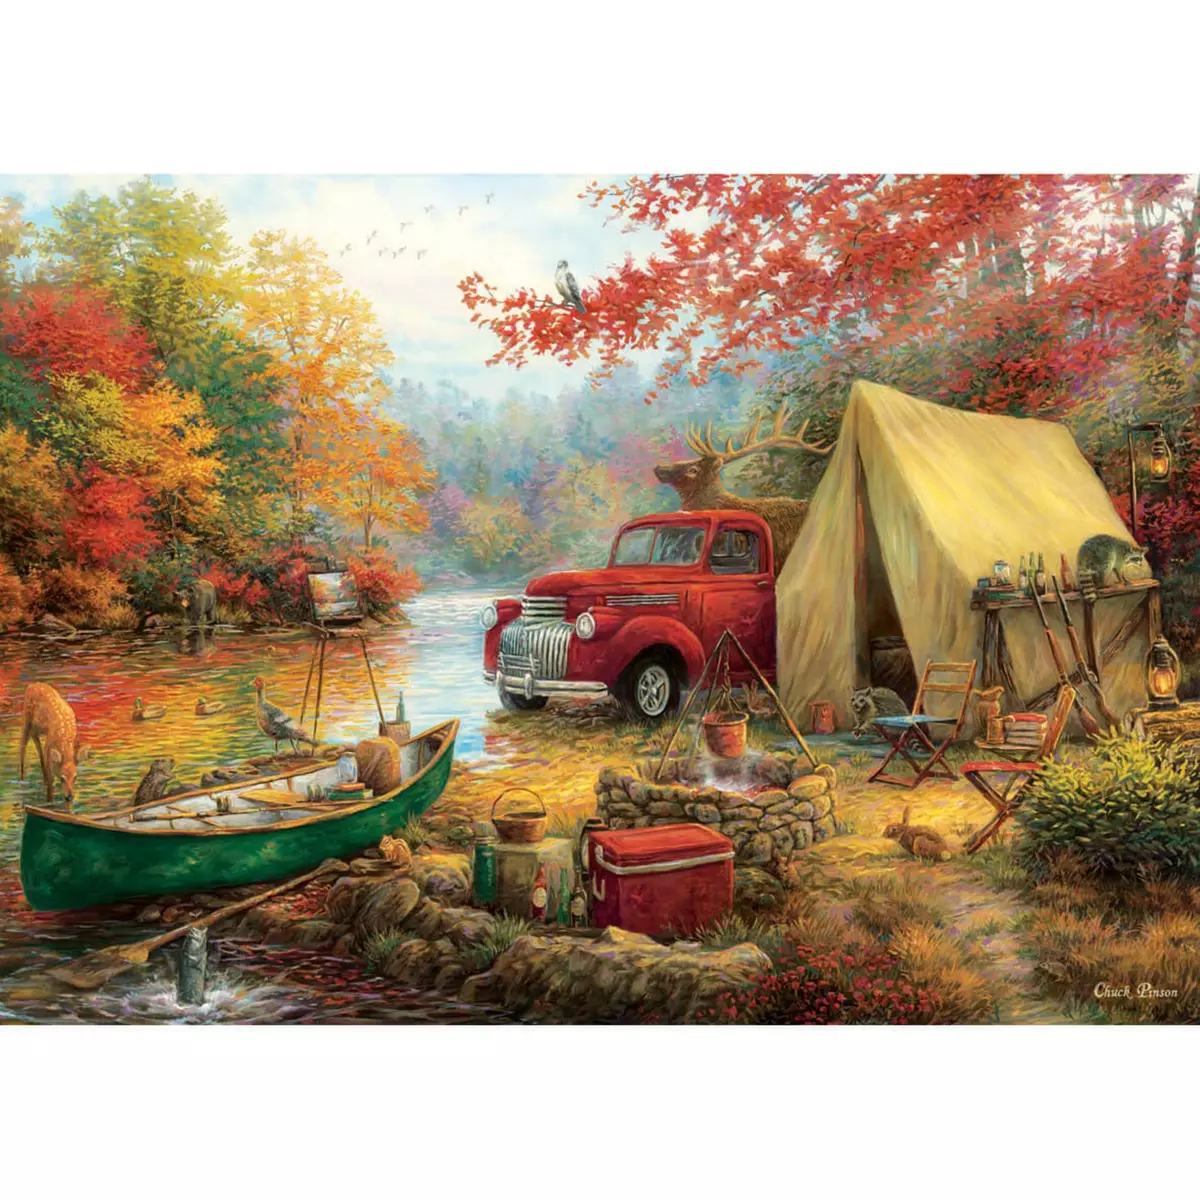 PERRE / ANATOLIAN Puzzle 1500 pièces : Camping sauvage